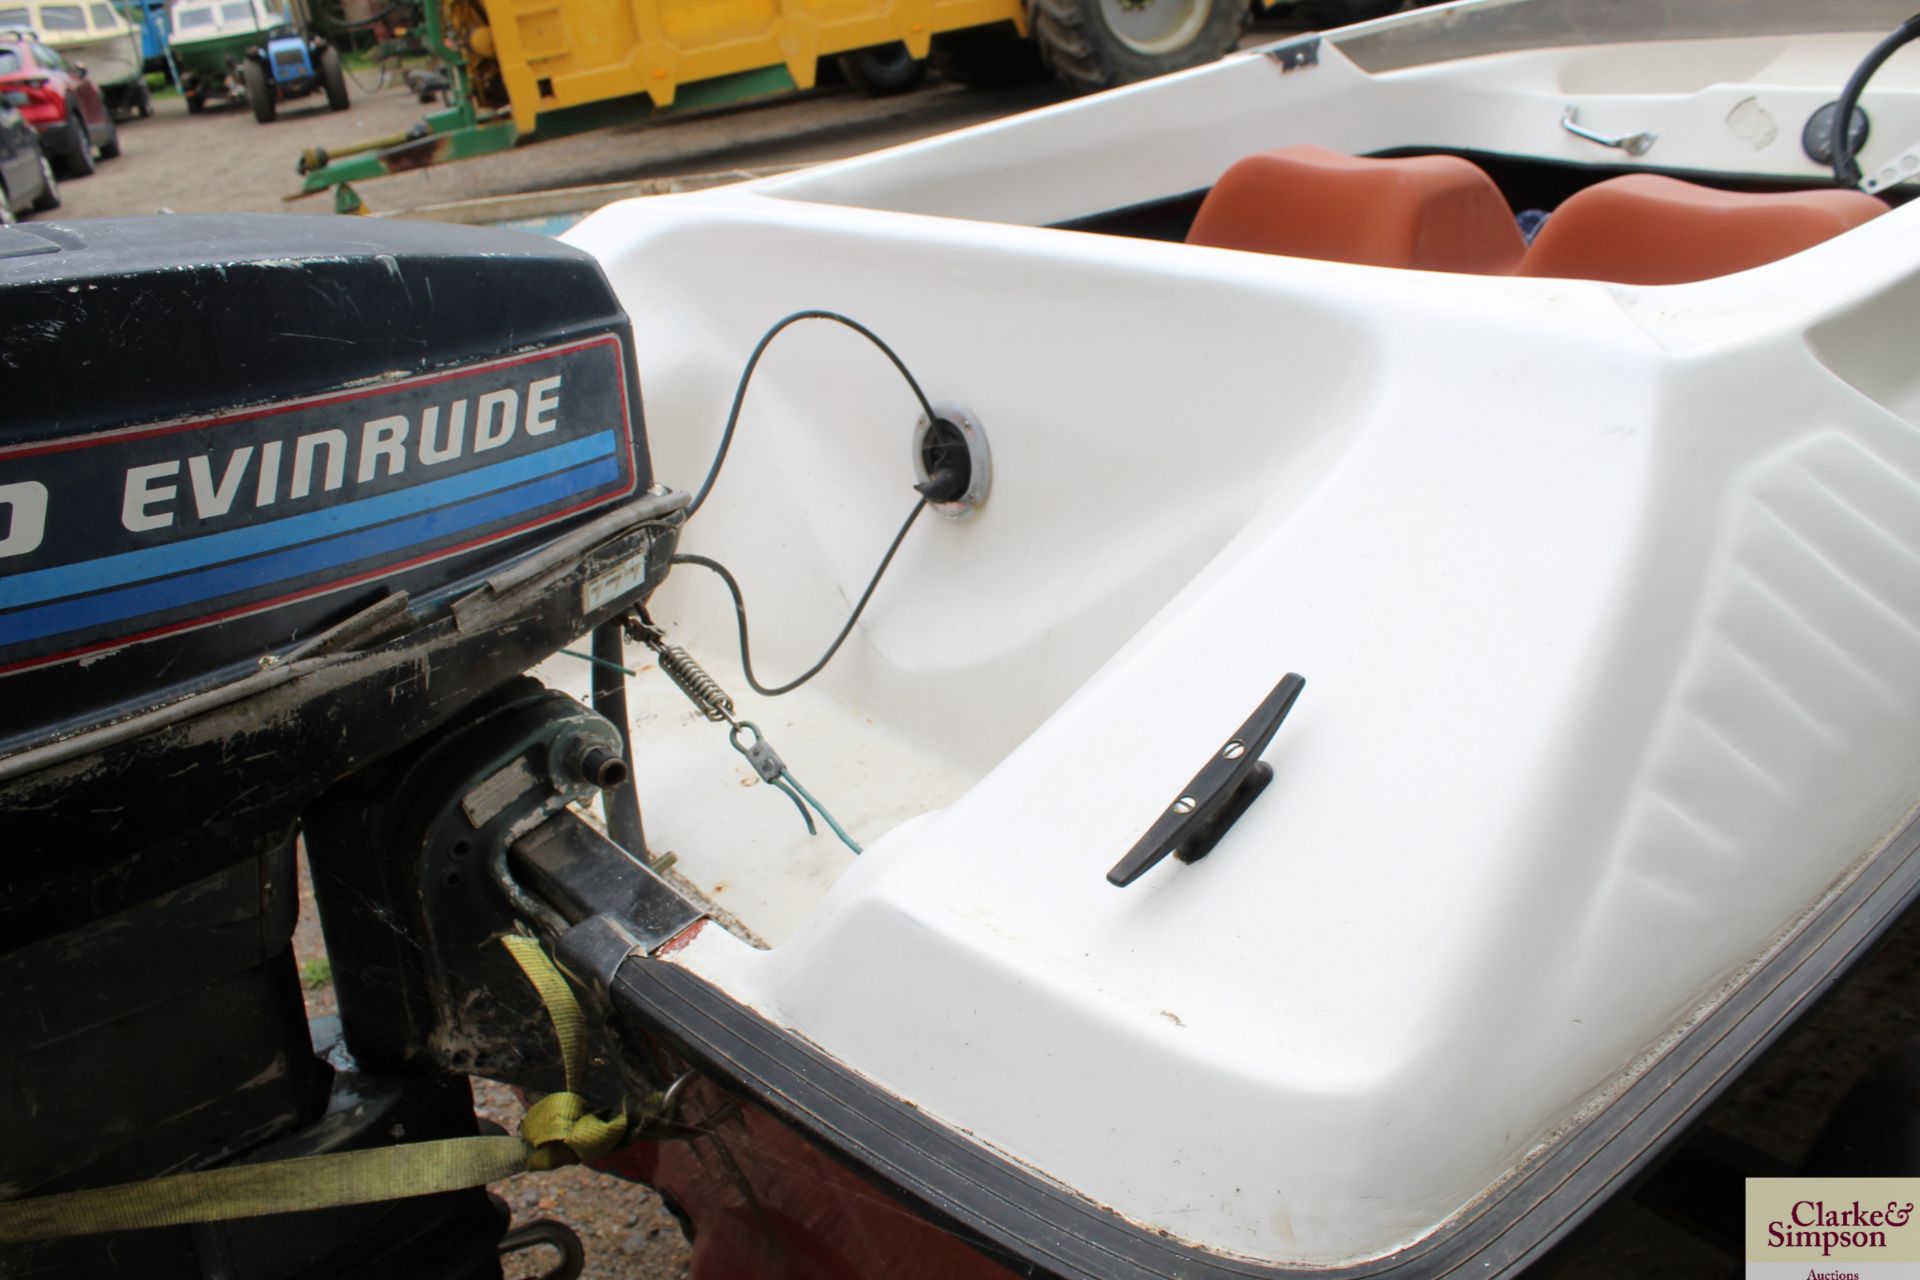 13ft speedboat. With Evinrude 60HP outboard (runs and pumps water), trailer, water skis, knee board, - Image 8 of 17